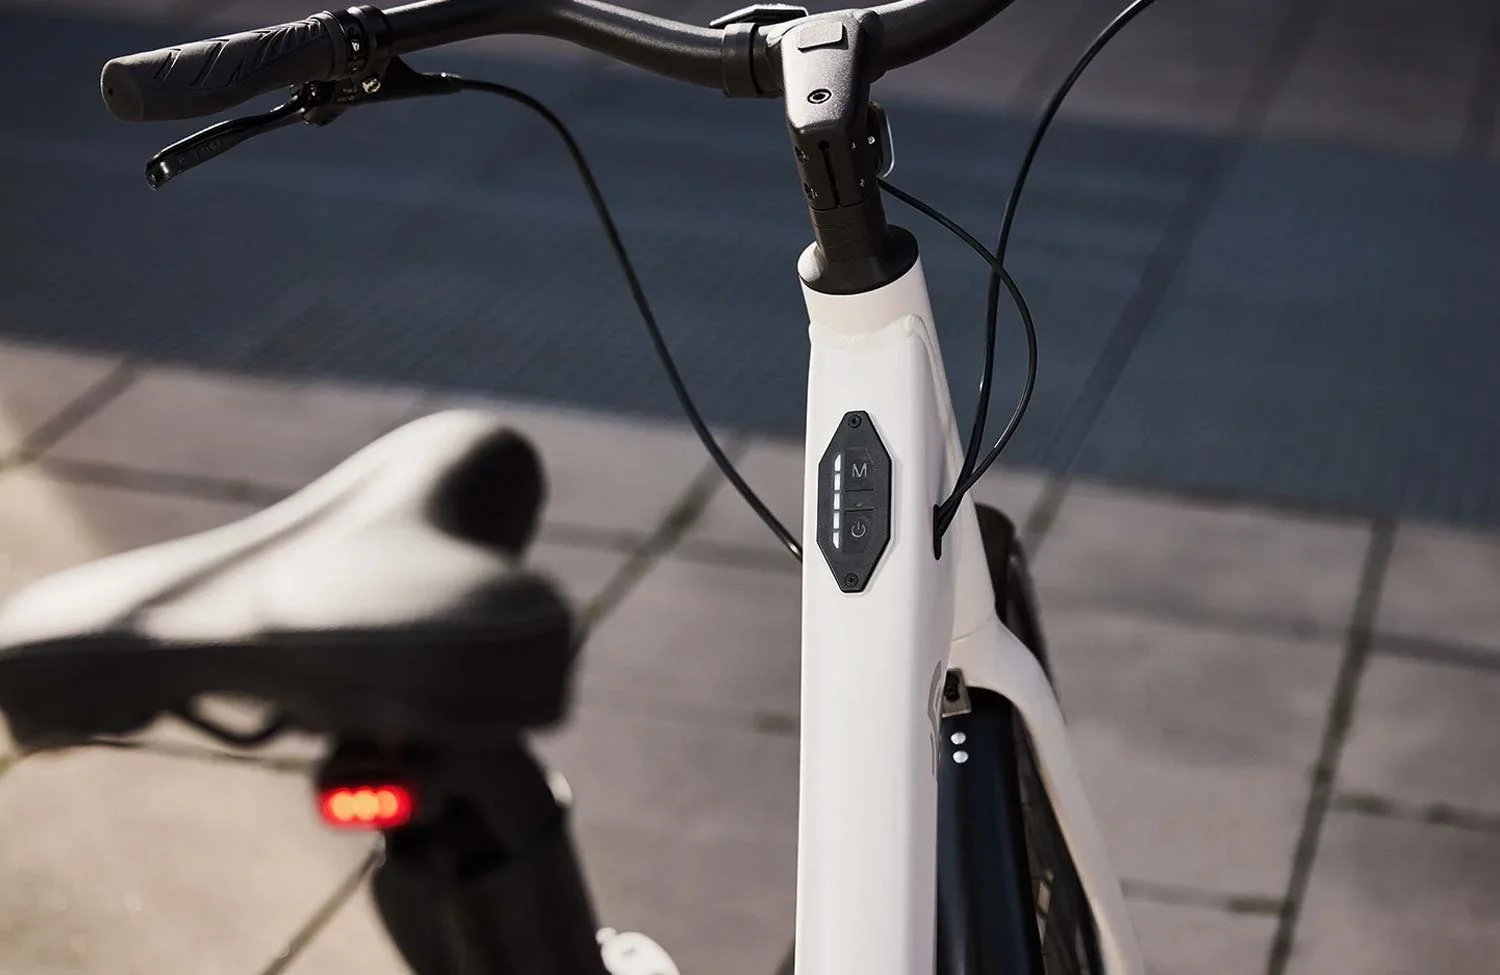 An urban e-bike from the — Lidl take Crivit new we bike from the a discounter: look at